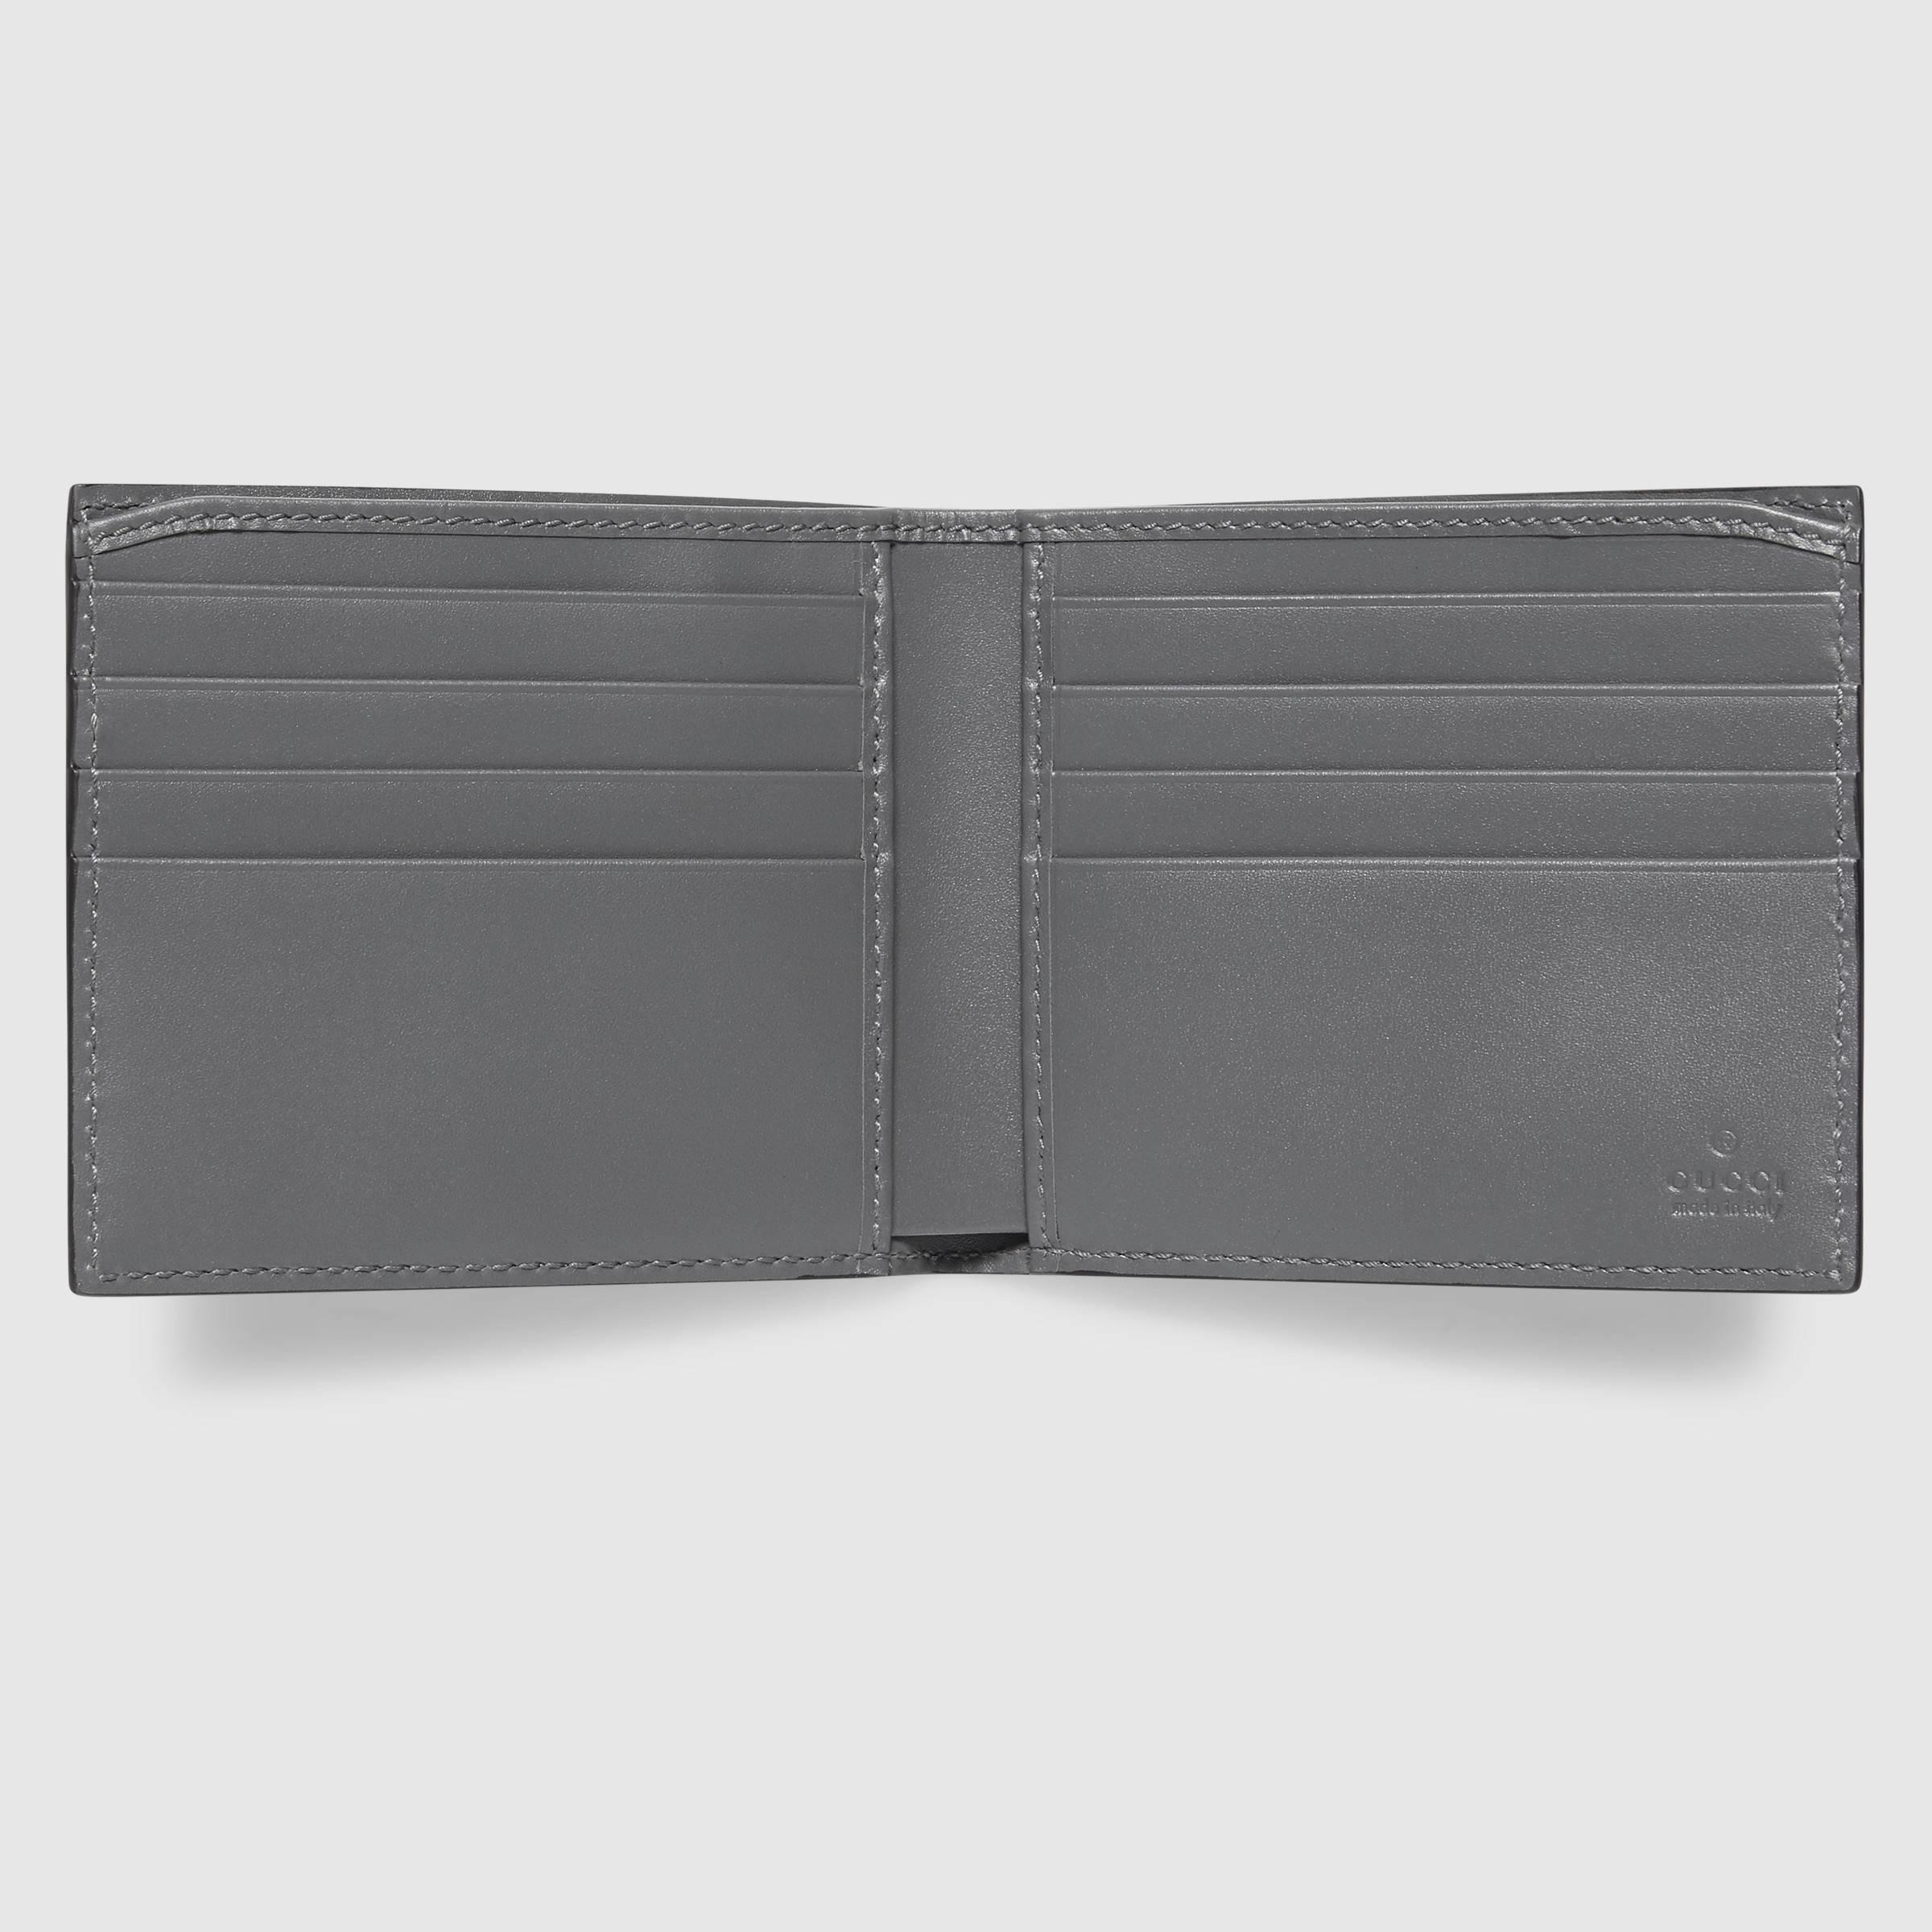 Gucci Signature Wallet in Gray for Men - Lyst